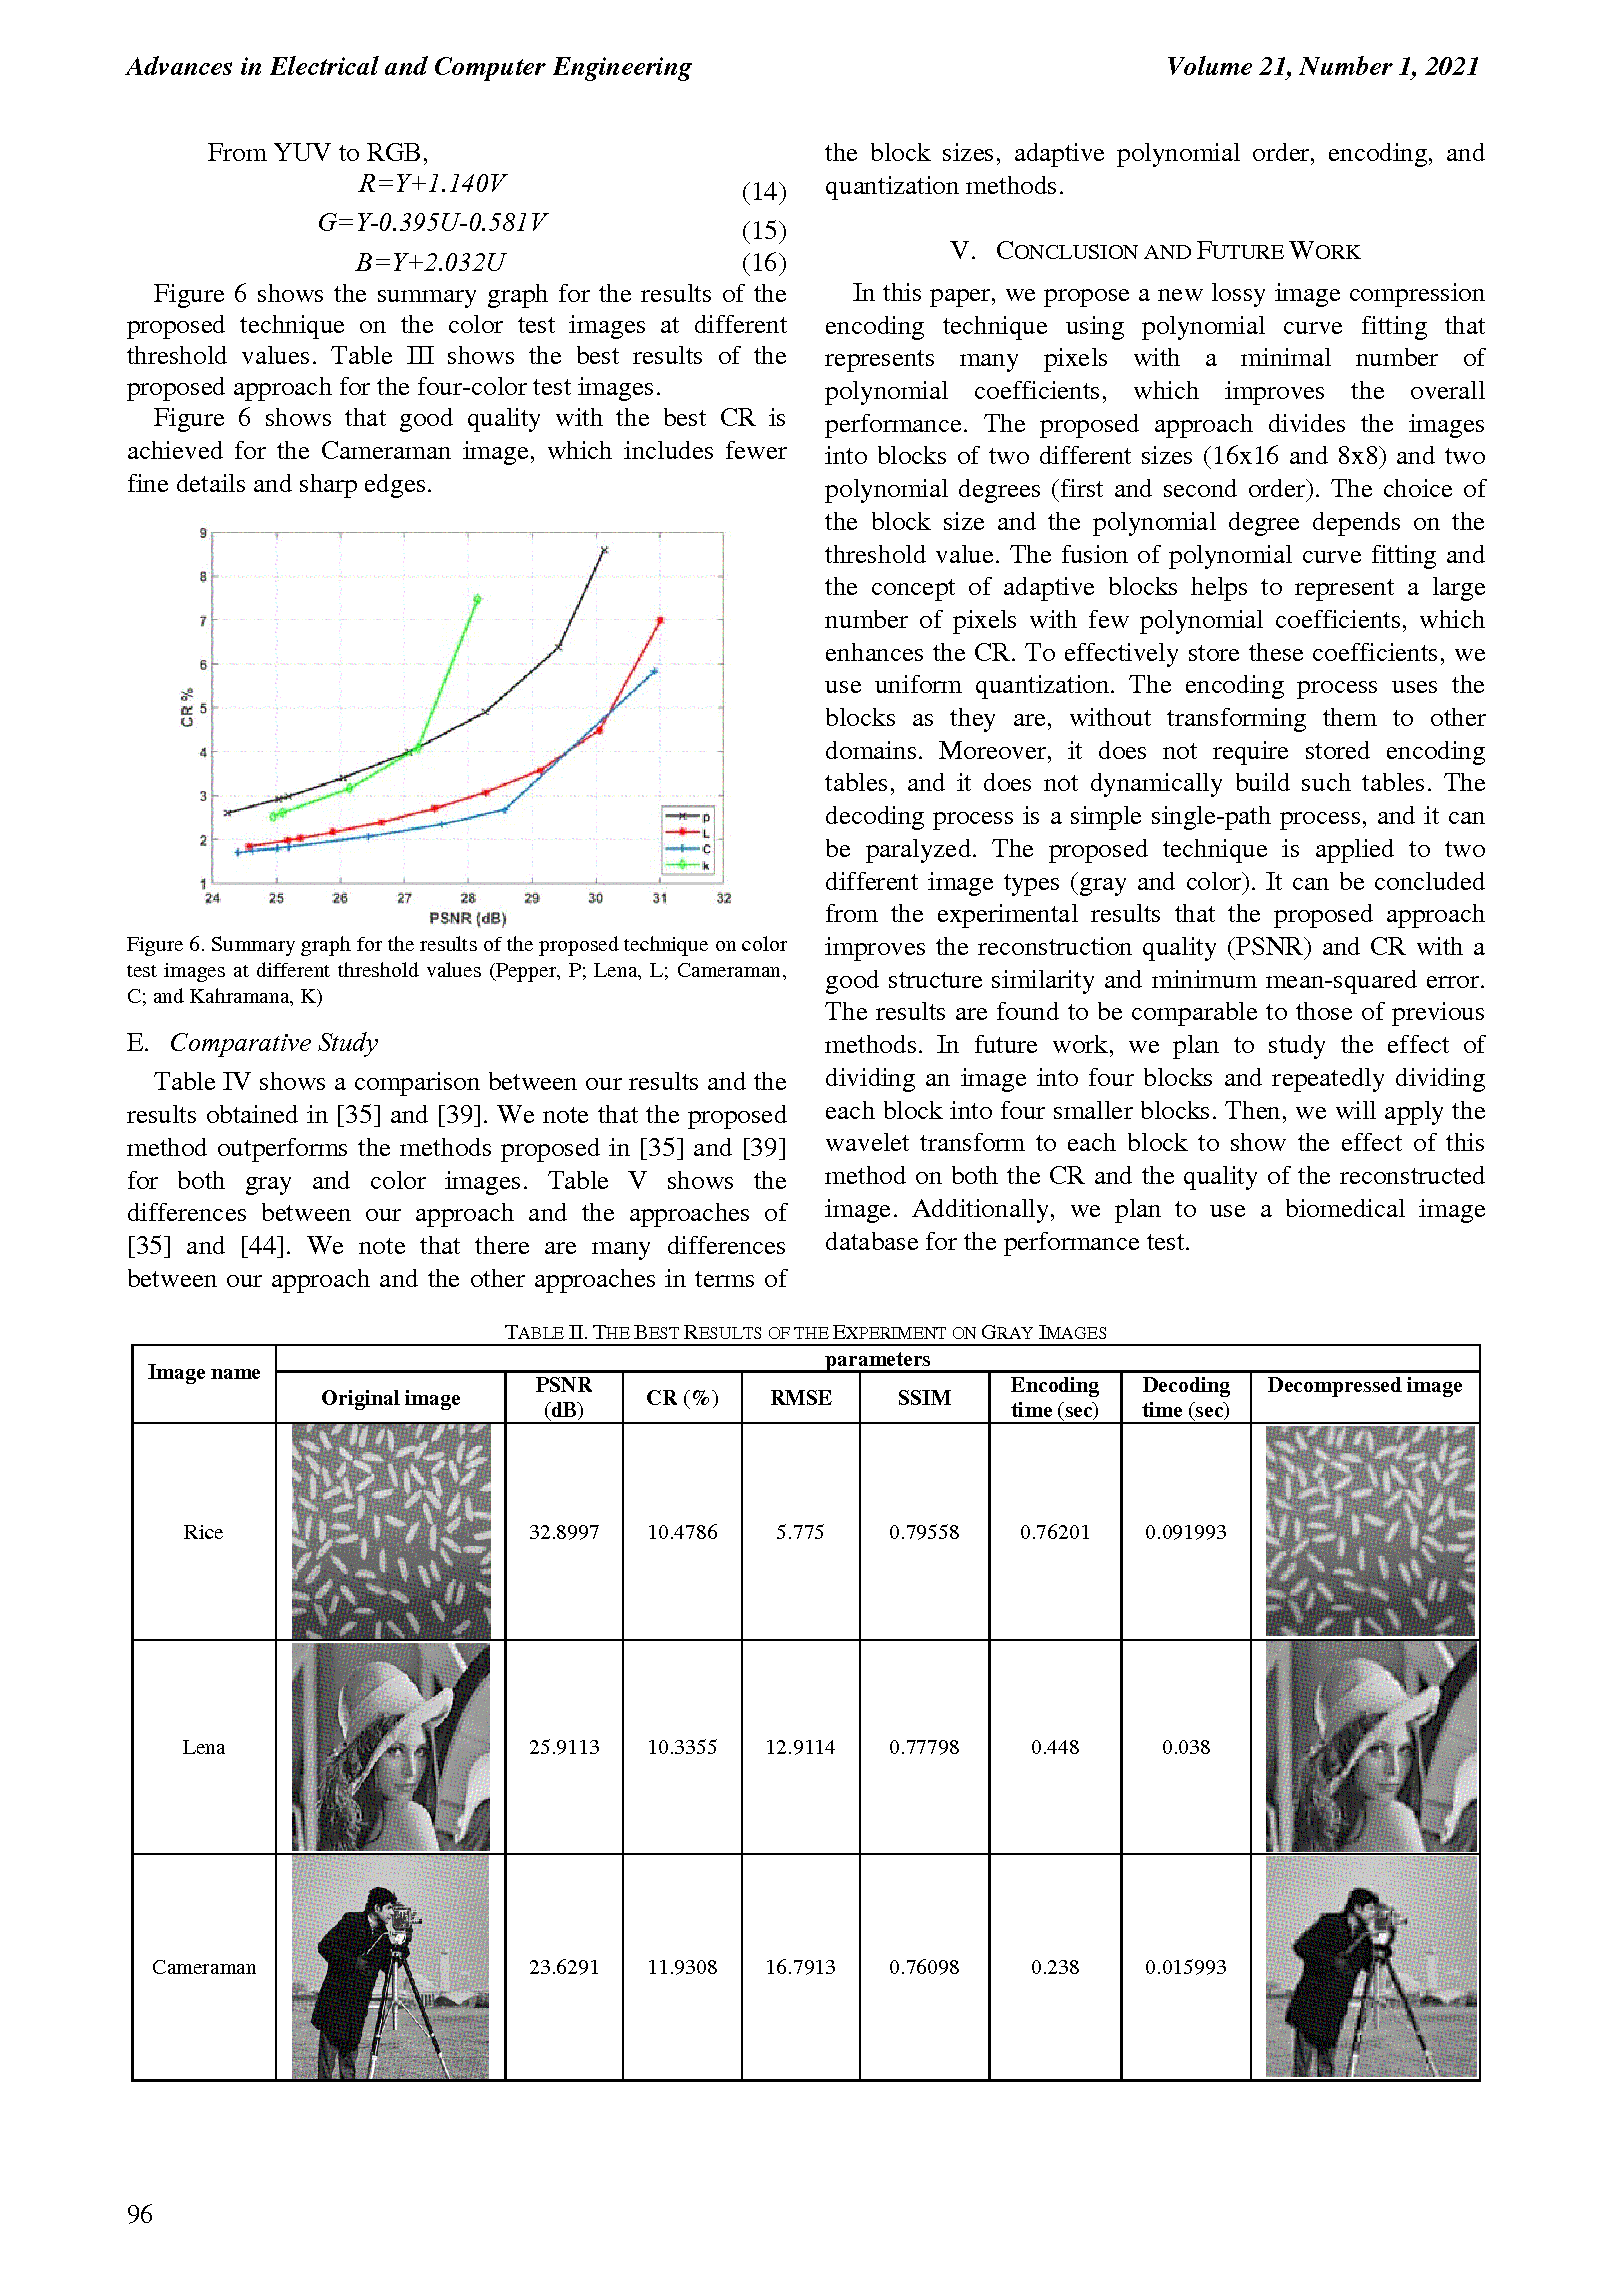 PDF Quickview for paper with DOI:10.4316/AECE.2021.01010